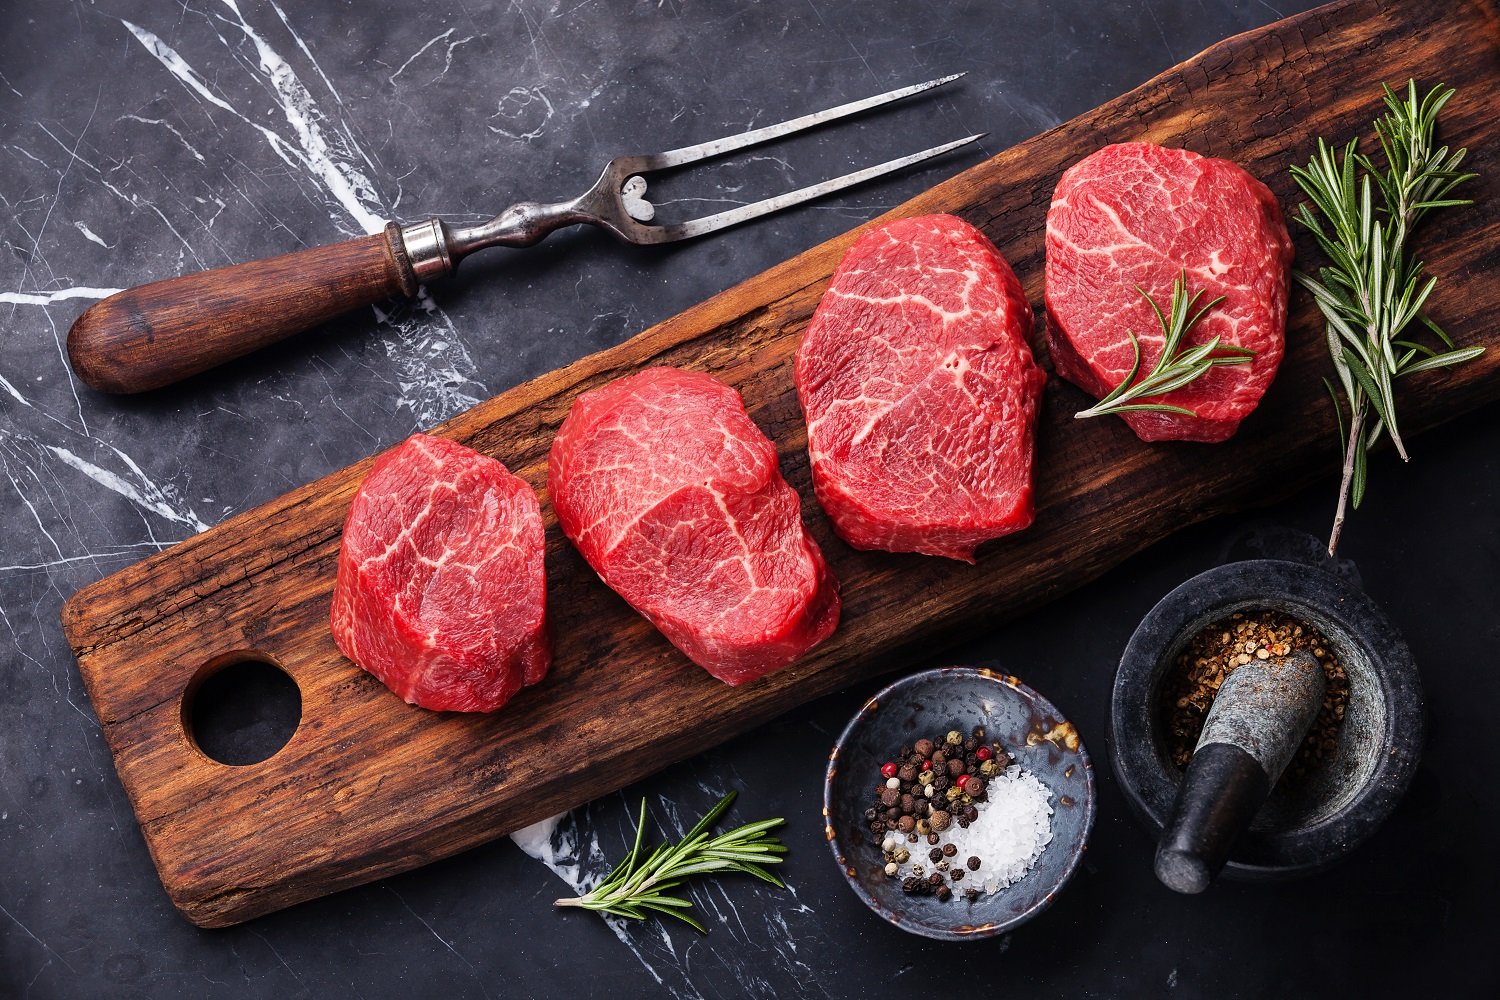 South-Africa-is-the-largest-meat-producer-in-Africa